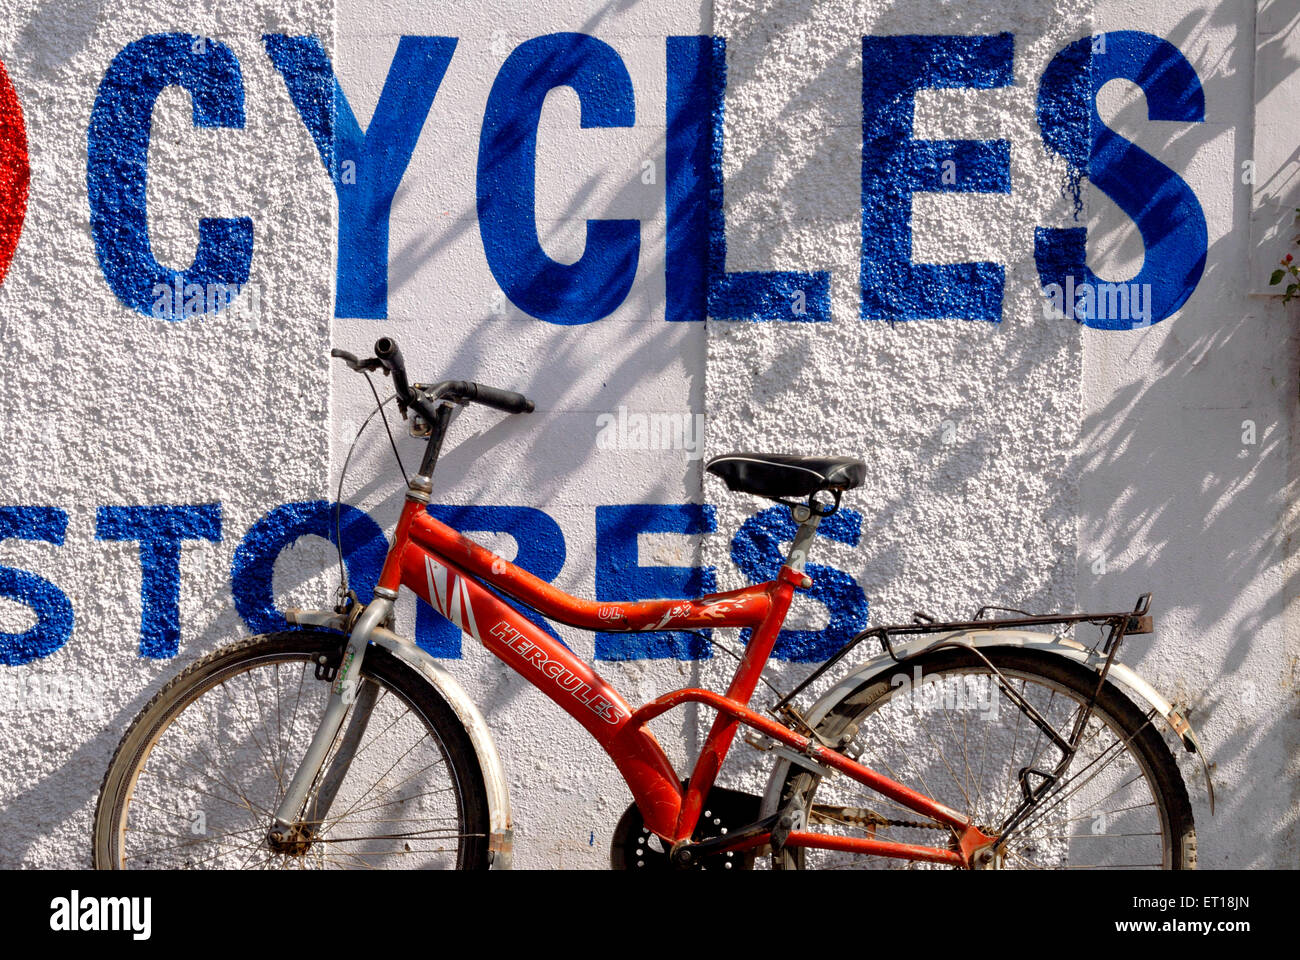 Bicycle Hercules resting parked against wall with sign Cycles Stores, India Stock Photo